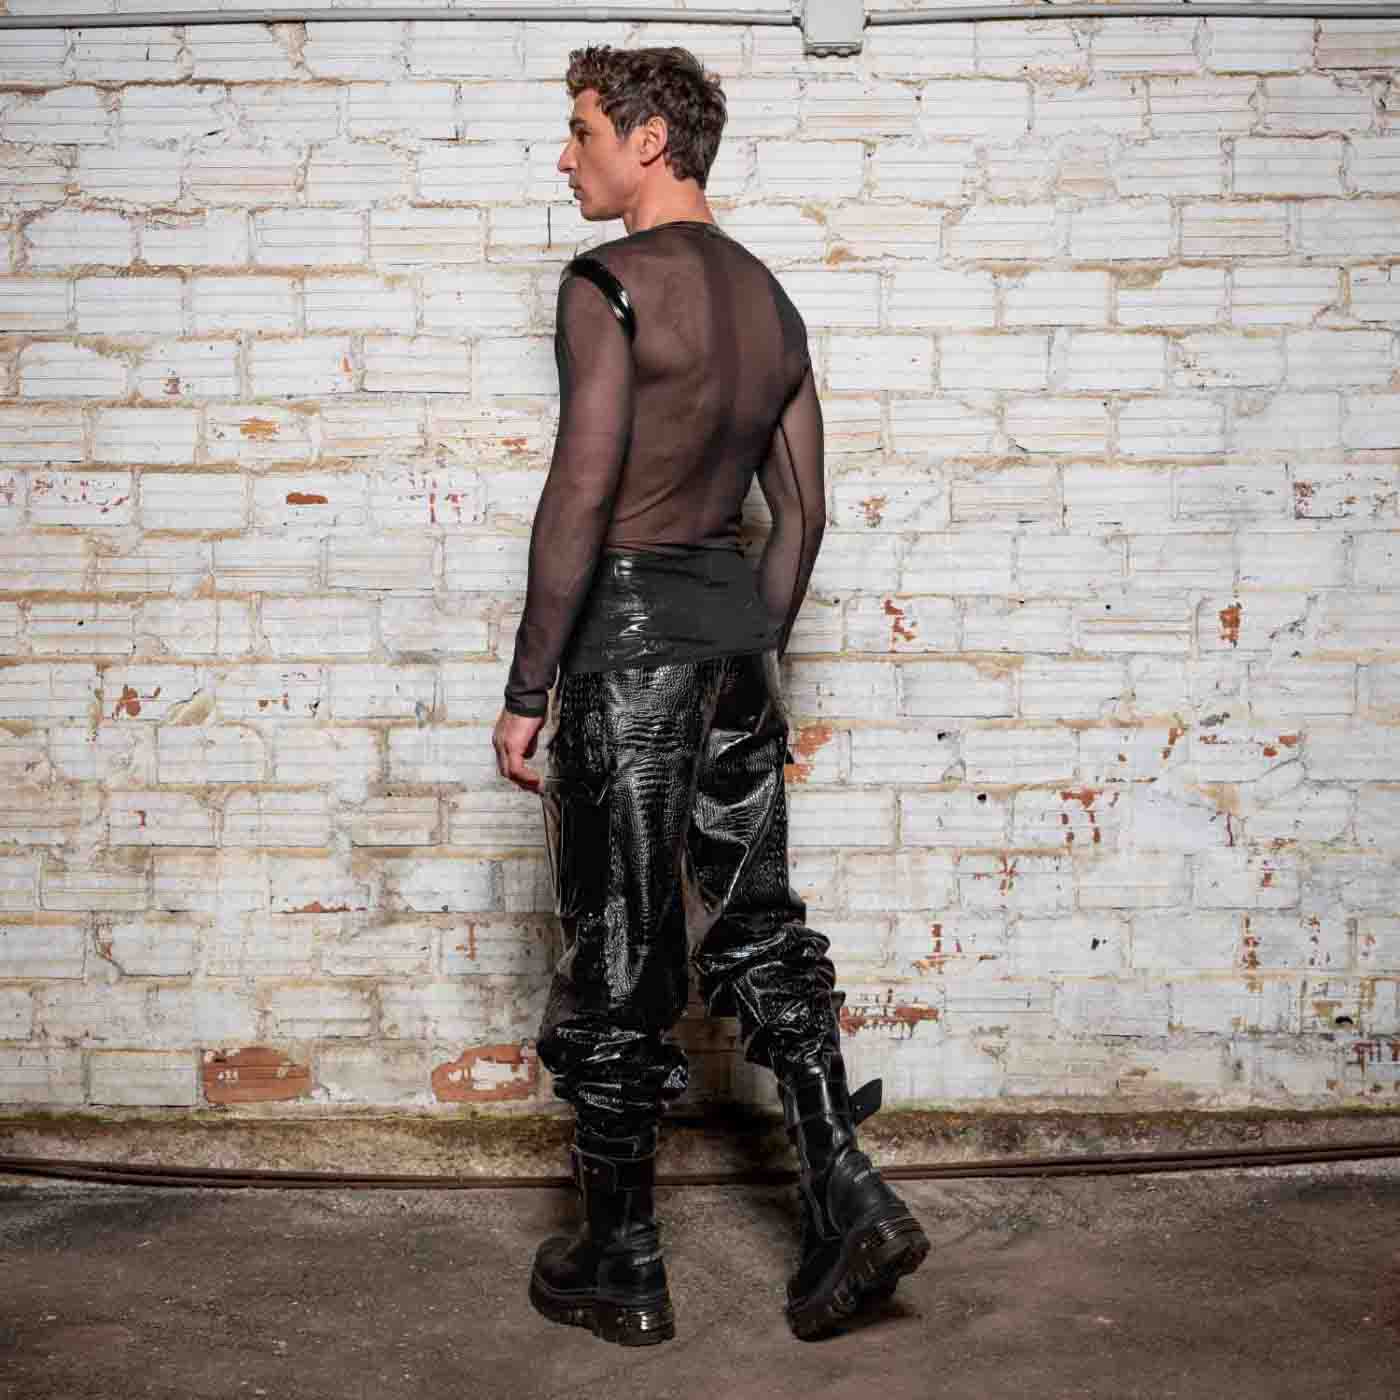 The Ali Mesh Fishnet & Patent V Neck Long Sleeve T-Shirt on model wearing black patent leather pants and combat boots, rear view.